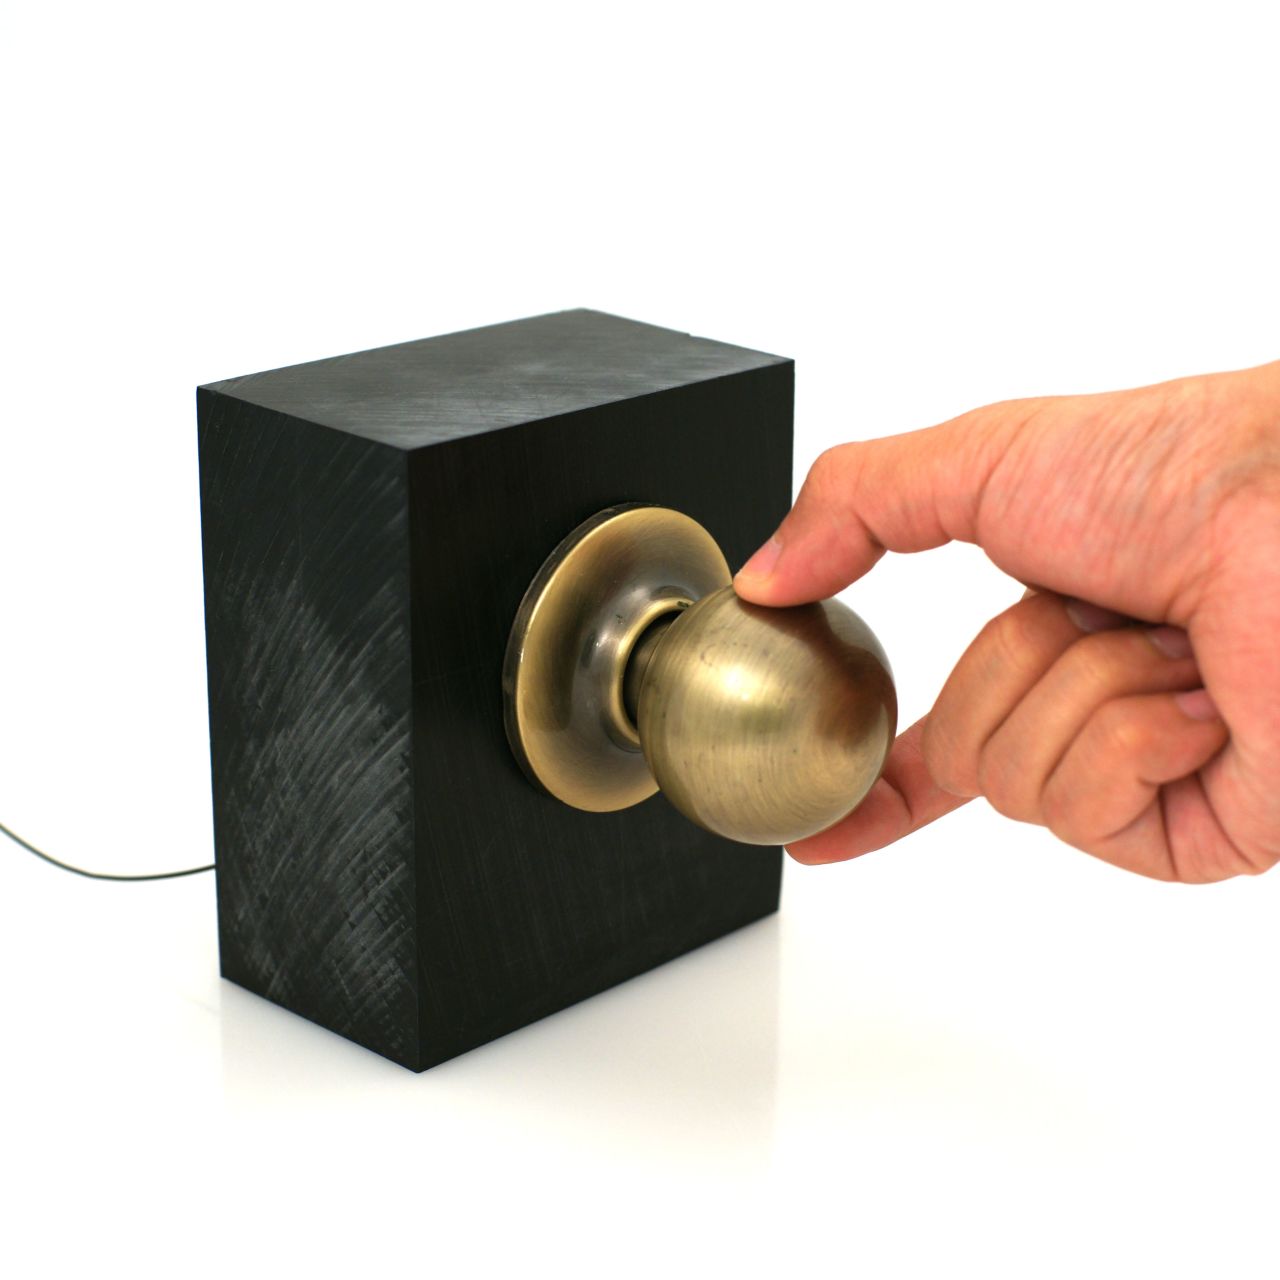 Objects that recognize your touch and act accordingly? When you leave your office, use two fingers on a doorknob to mean "be right back", or hold it with your entire hand to lock the door completely. All possible thanks to the prototype <a href="http://www.disneyresearch.com/project/touche-touch-and-gesture-sensing-for-the-real-world/" target="_blank" target="_blank"><em>Touché</em></a> device from Disney Research. 